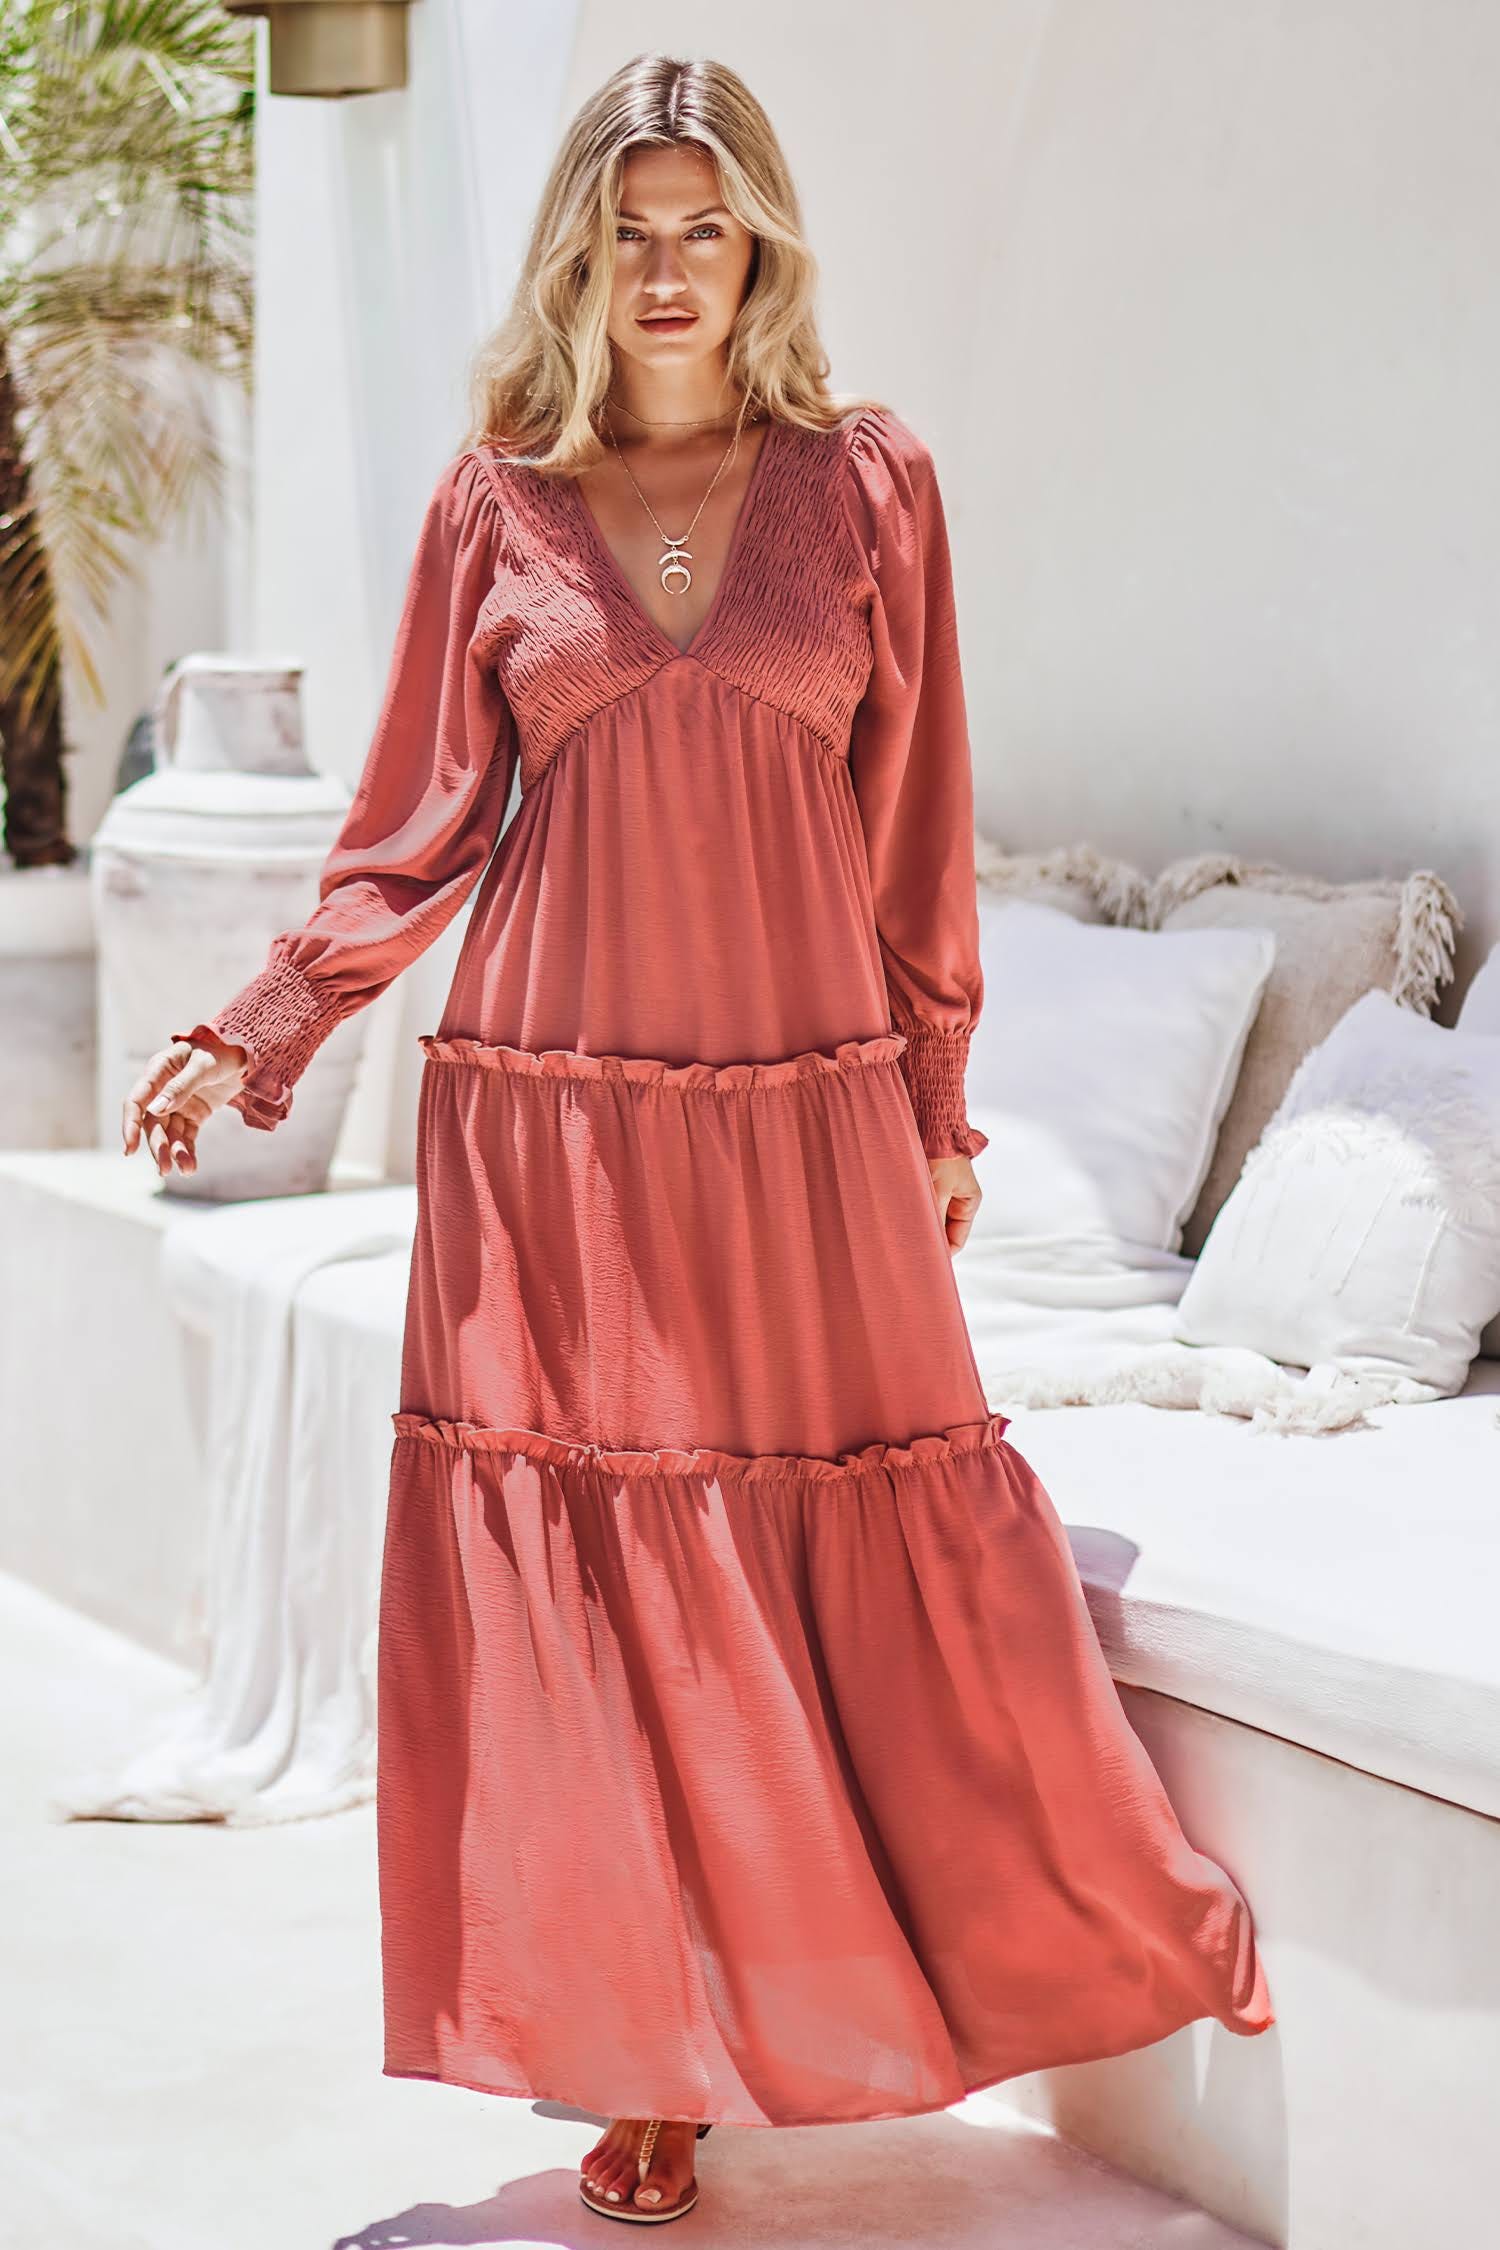 Rose & Ruffles Maxi Dress in Pink: Stylish and Romantic | Image